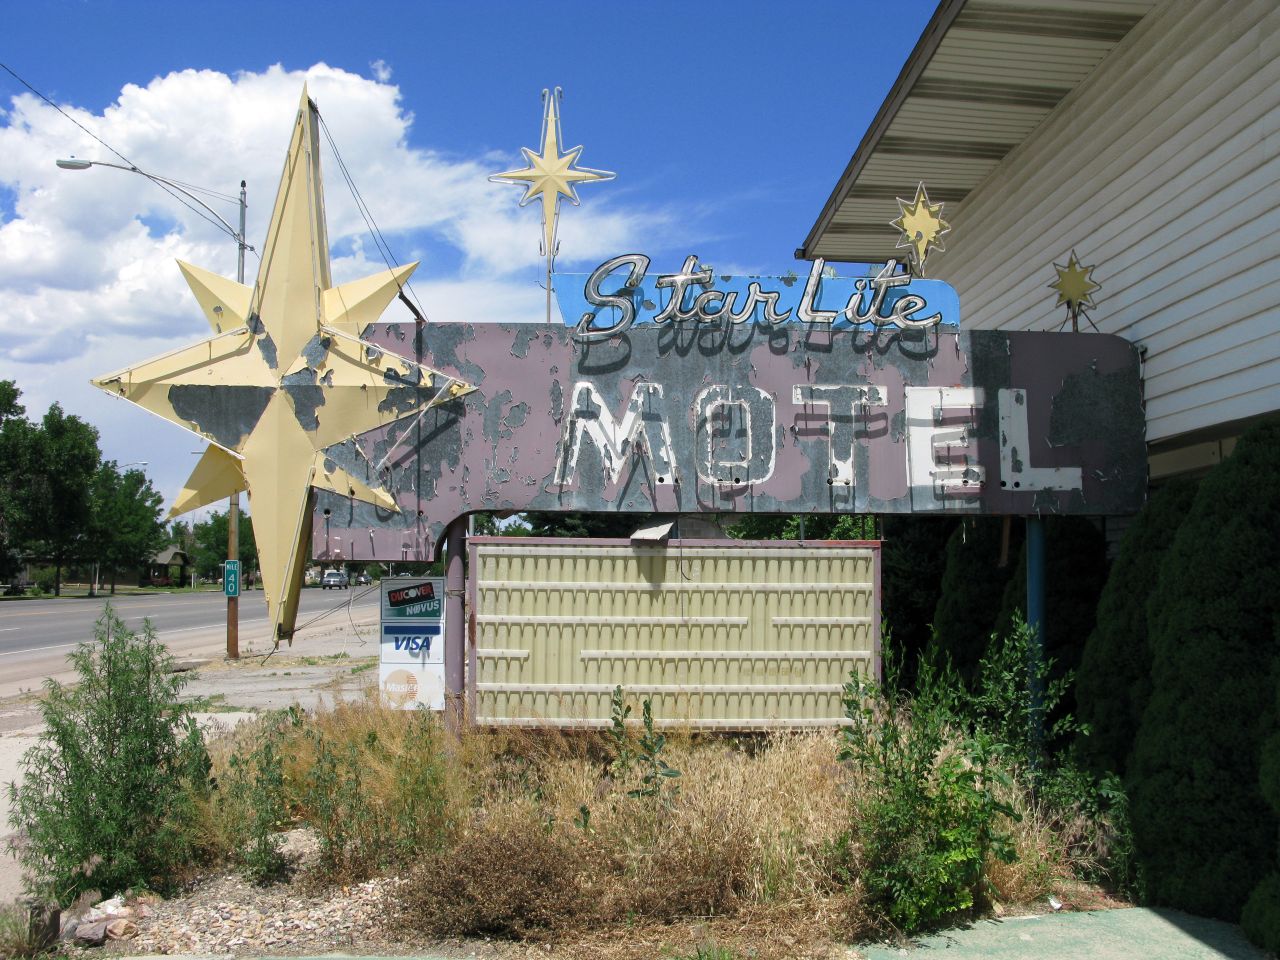 a faded sign is displayed on the side of the building